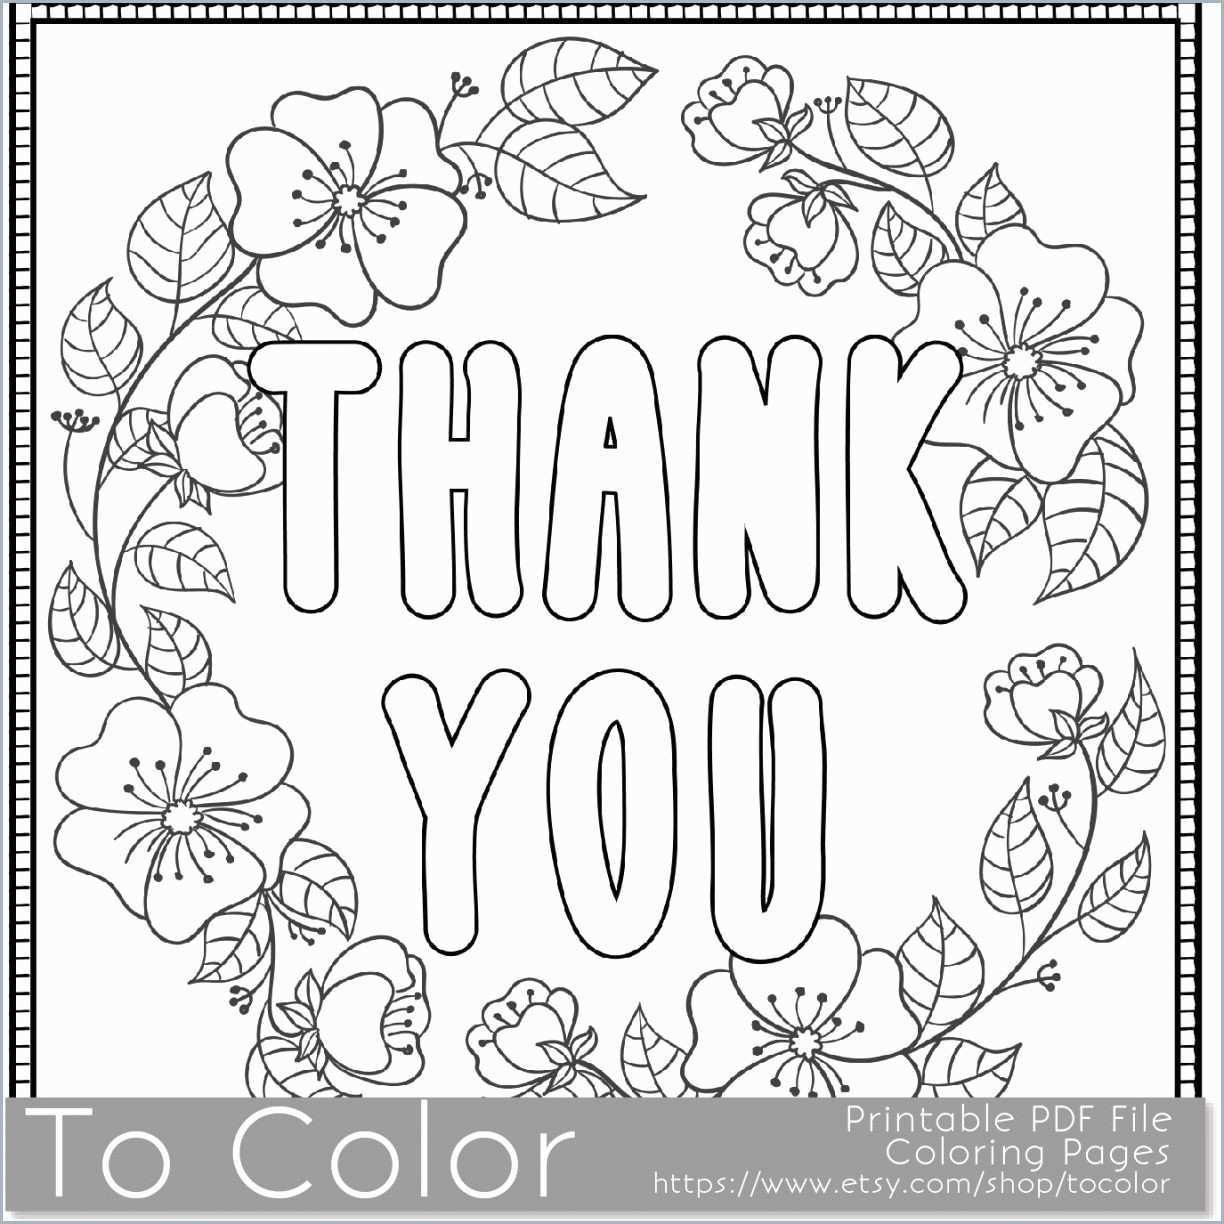 Name Coloring Page Coloring Pages Create Coloring Book From Photos Wonderfully Your